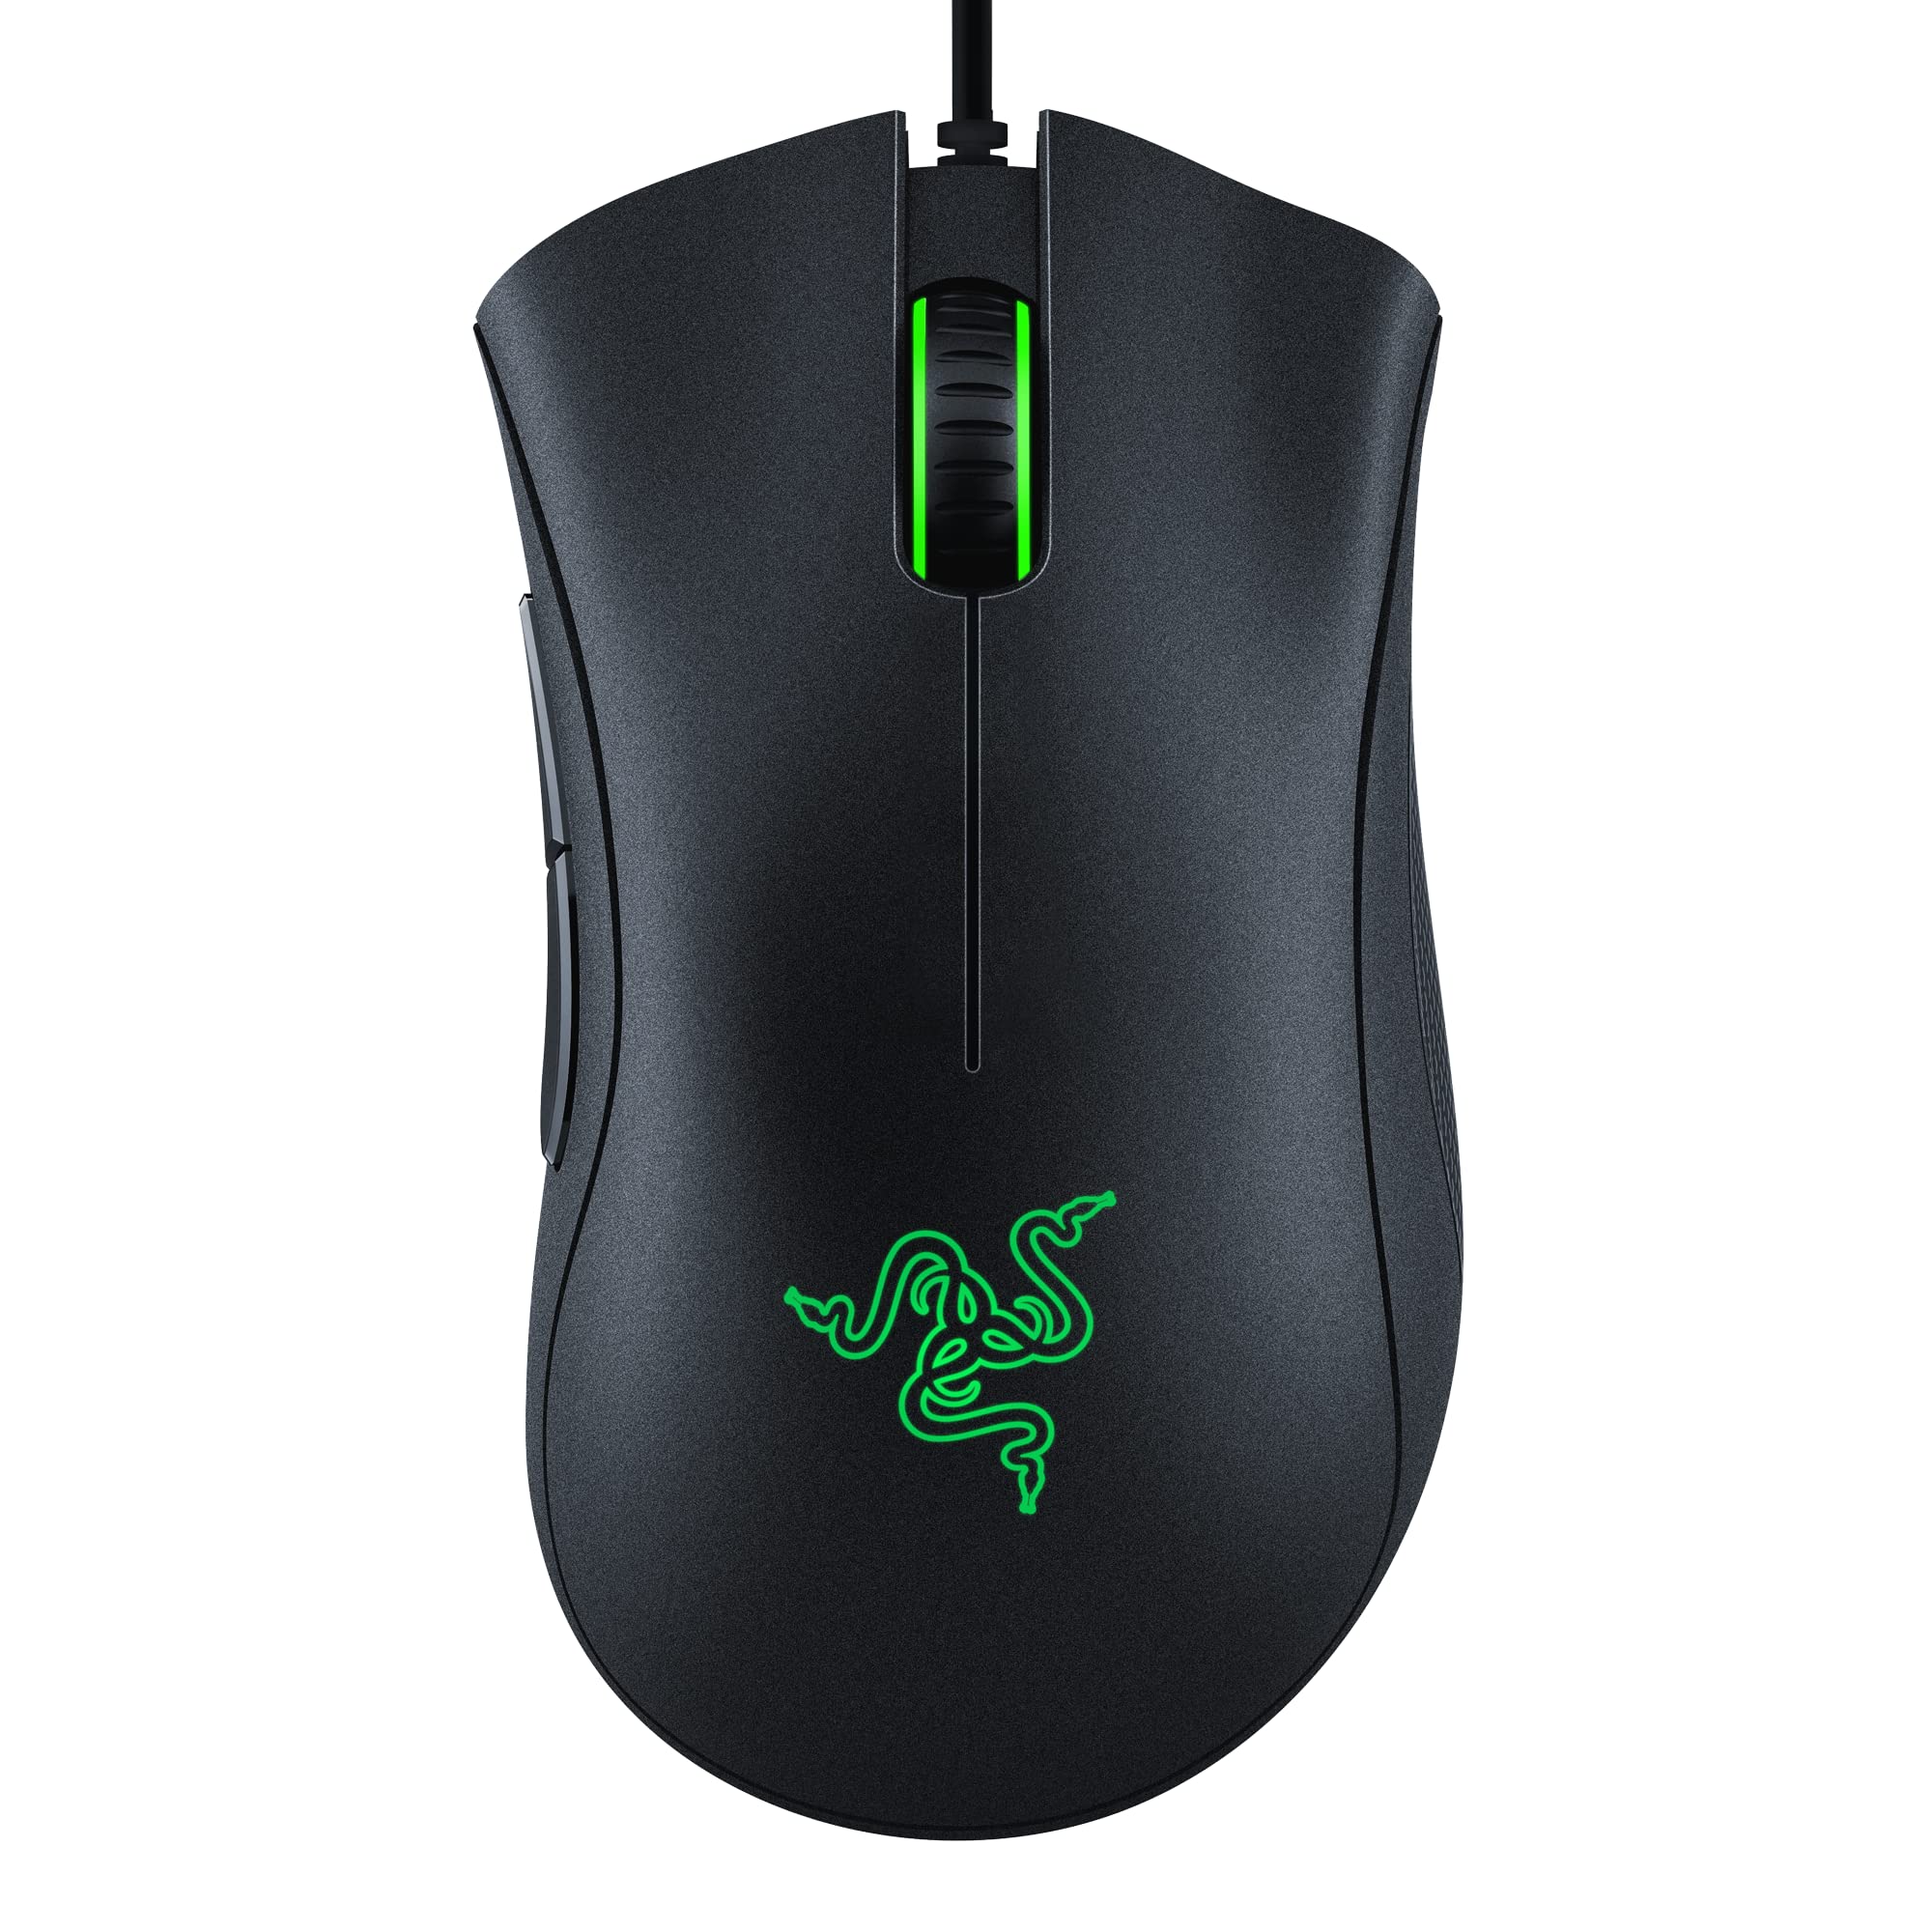 Razer DeathAdder Essential Gaming Mouse: 6400 DPI Optical Sensor - 5 Programmable Buttons - Mechanical Switches - Rubber Side Grips - Classic Black $25.03